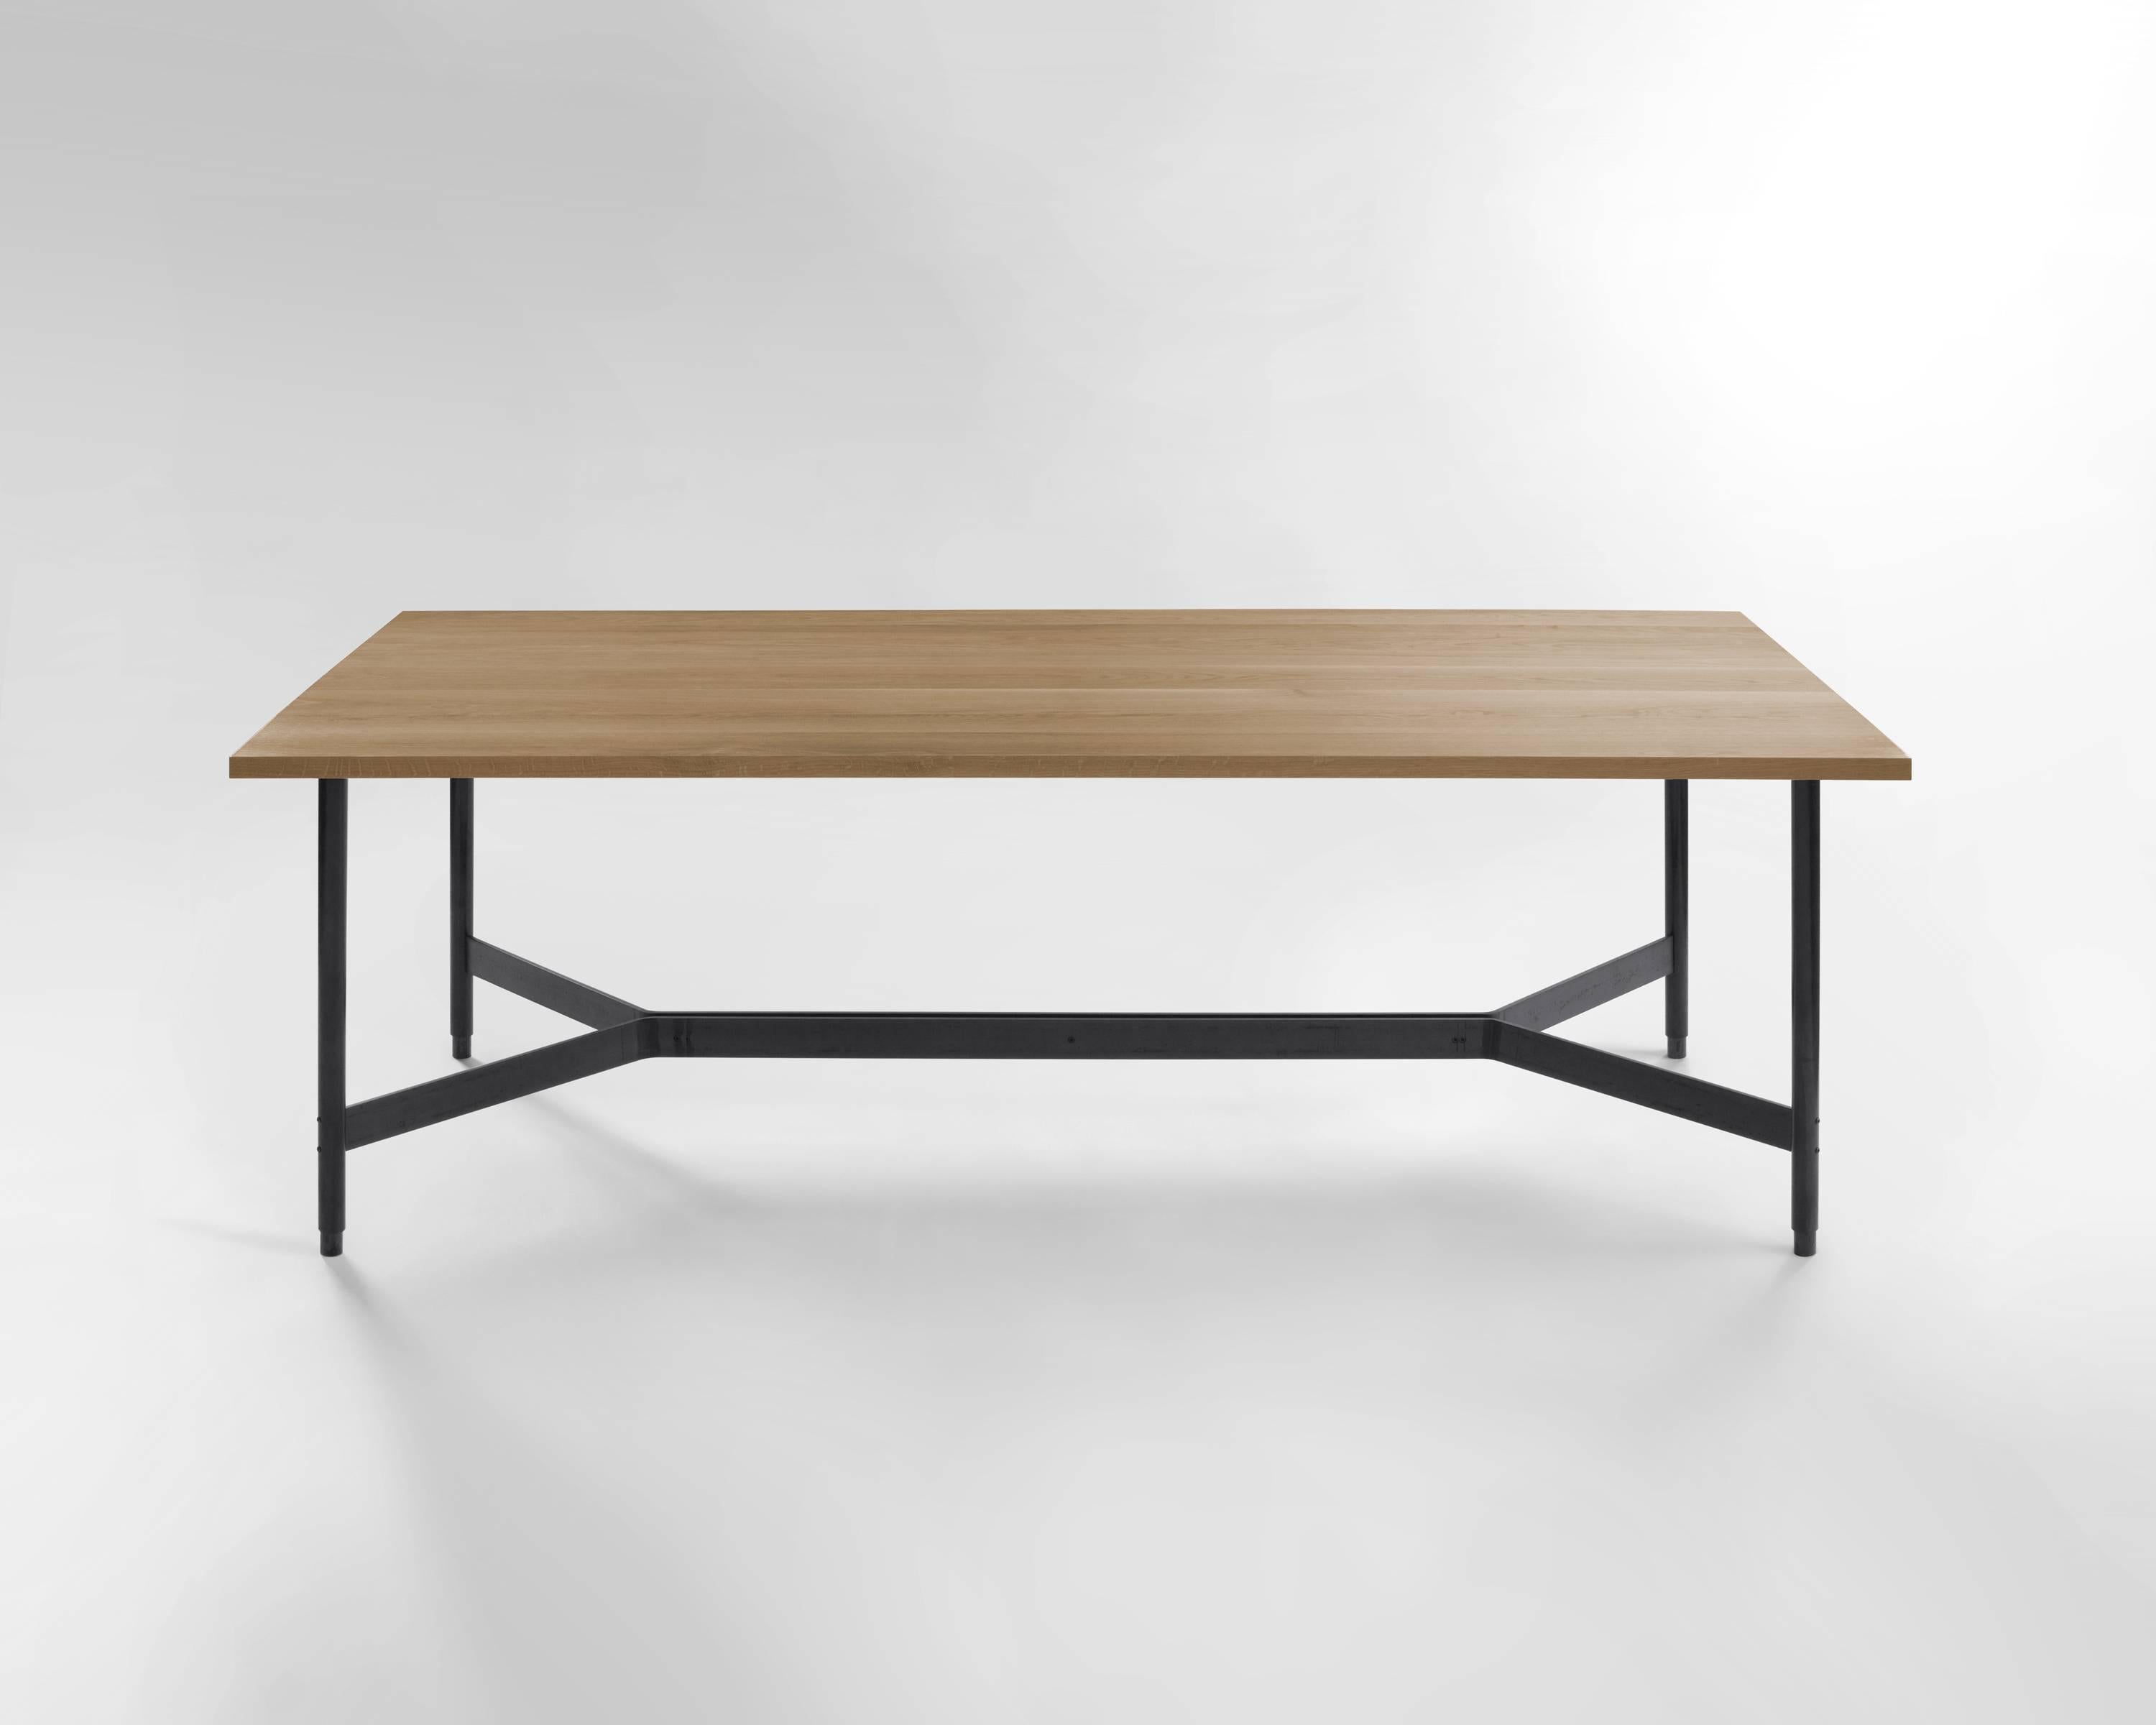 The AT11 performs beautifully as a dining table, but the detailing would scale well to any size, allowing for applications such as conference tables for the office and coffee tables for the home. The materials are handcrafted from solid materials